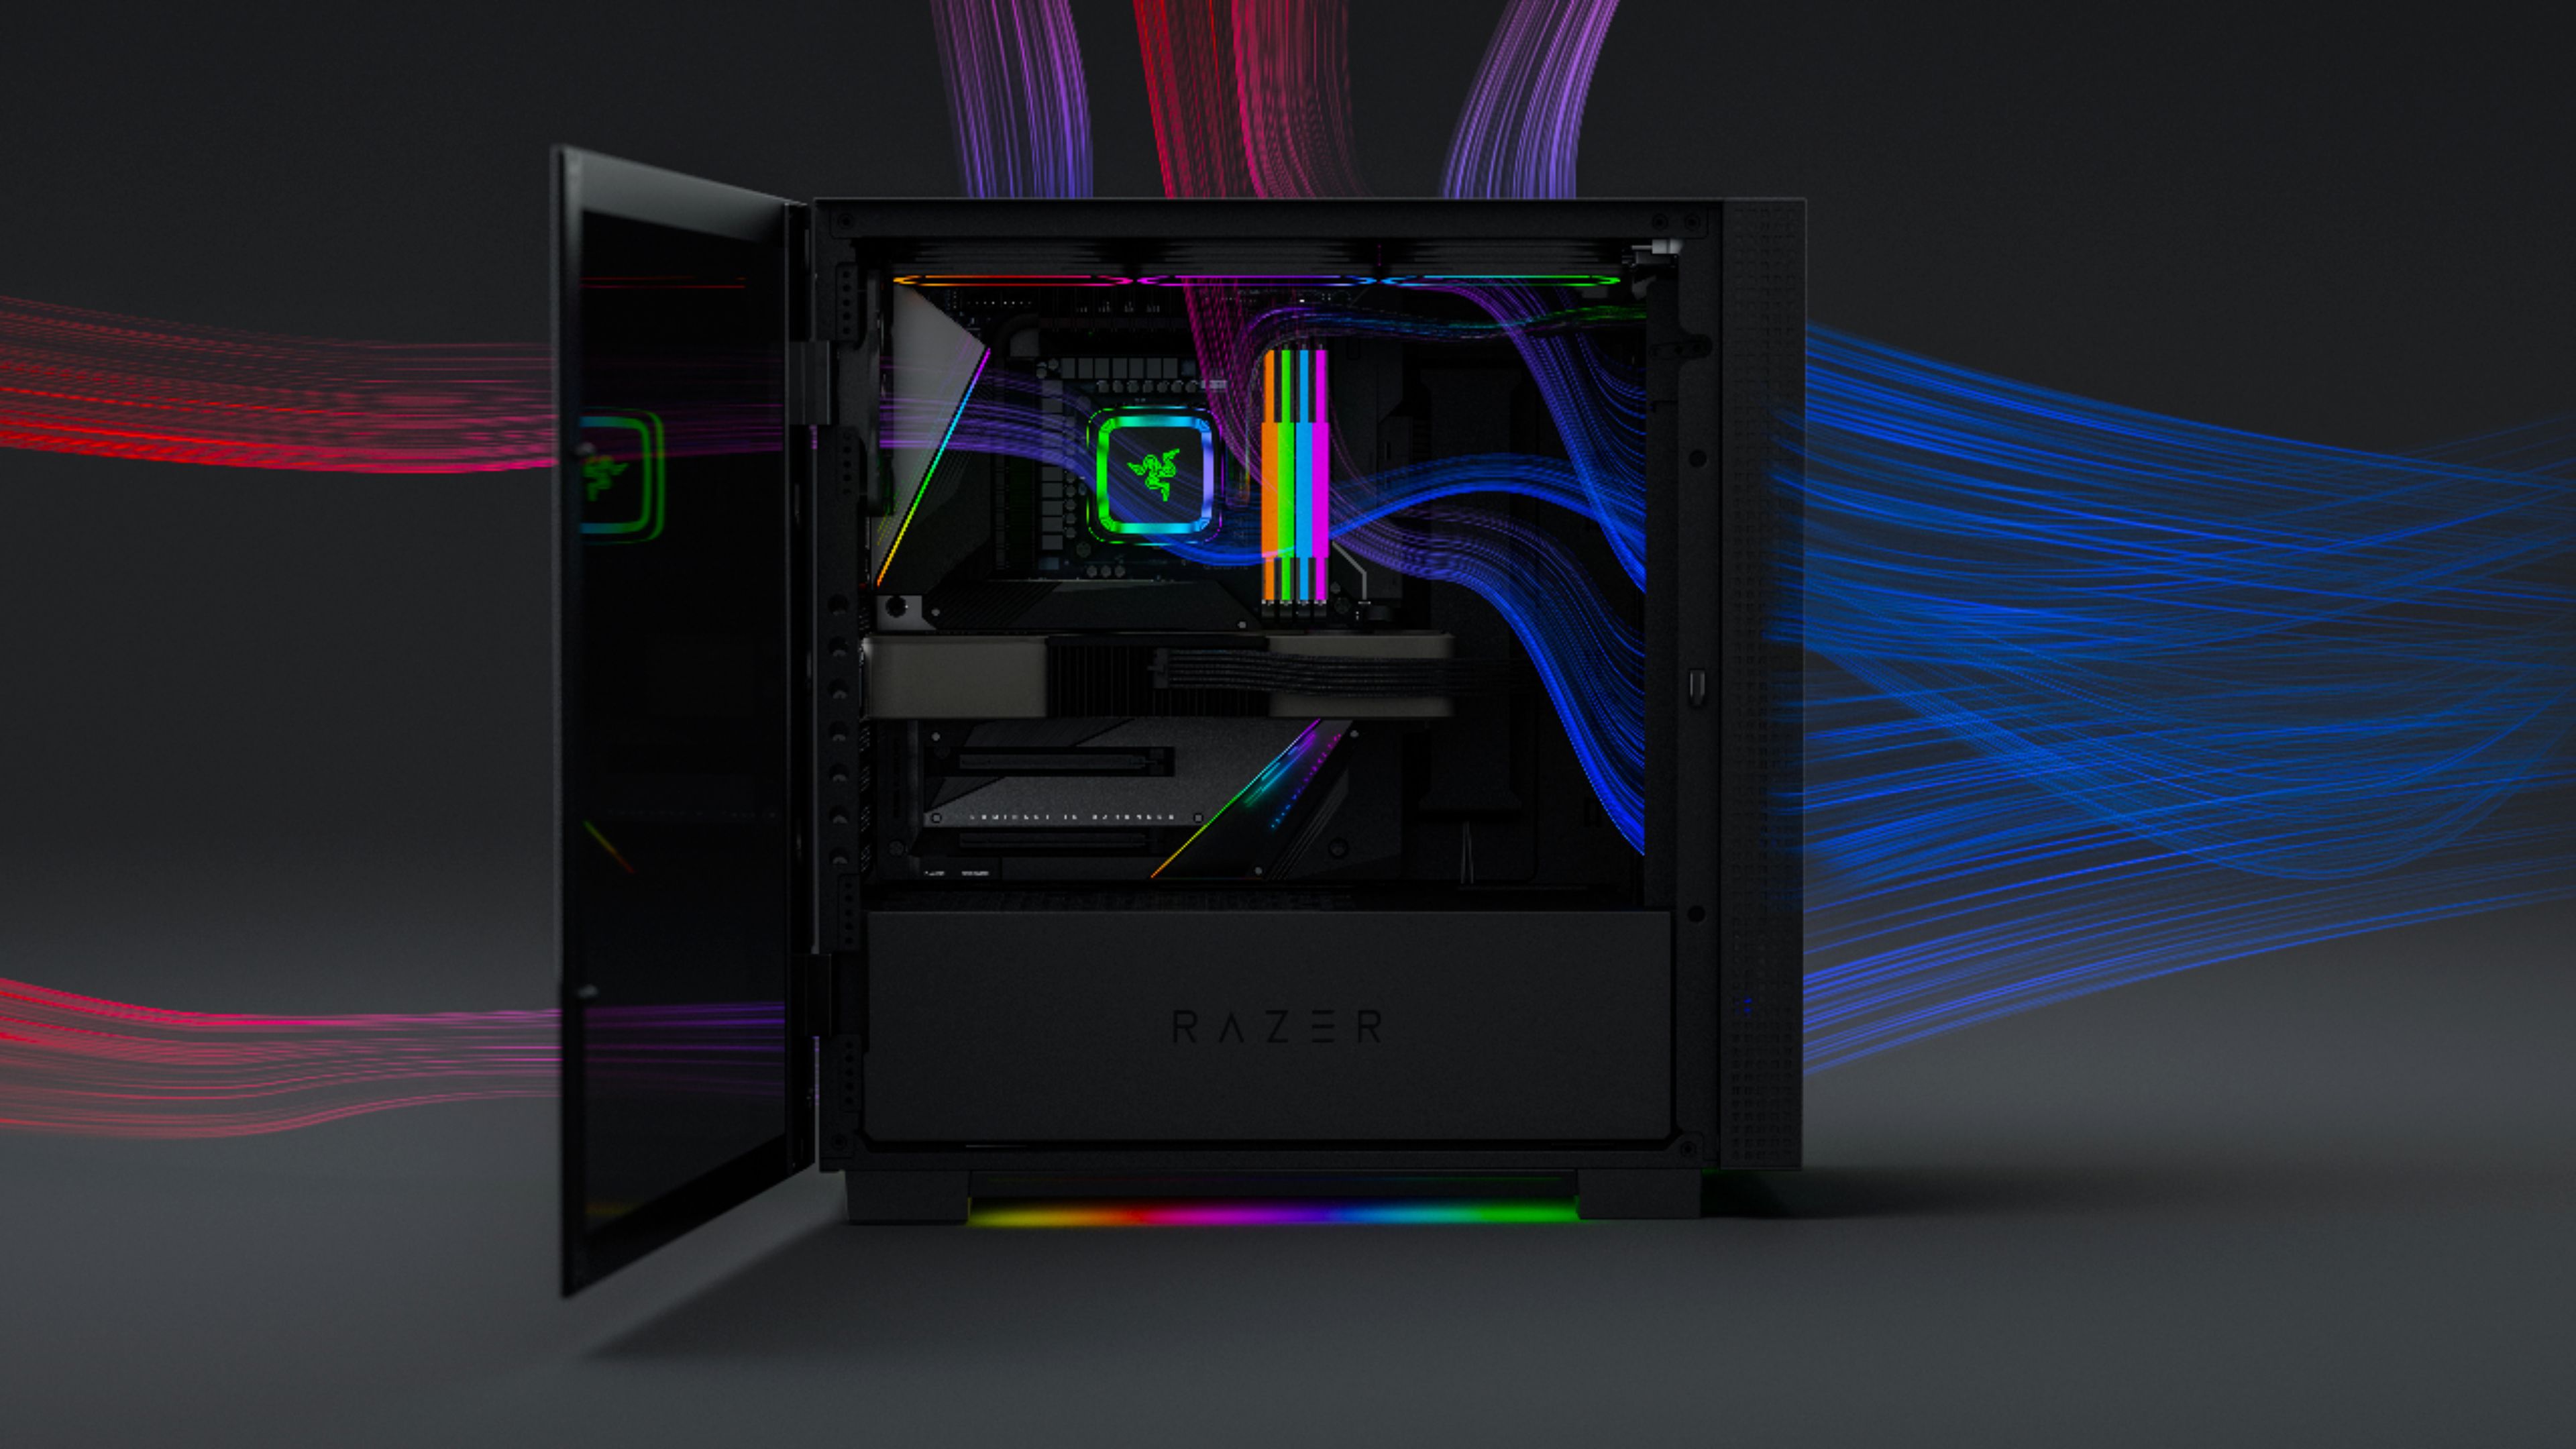 Best Buy: Razer Tomahawk Mid-tower ATX Gaming Chassis with Chroma 